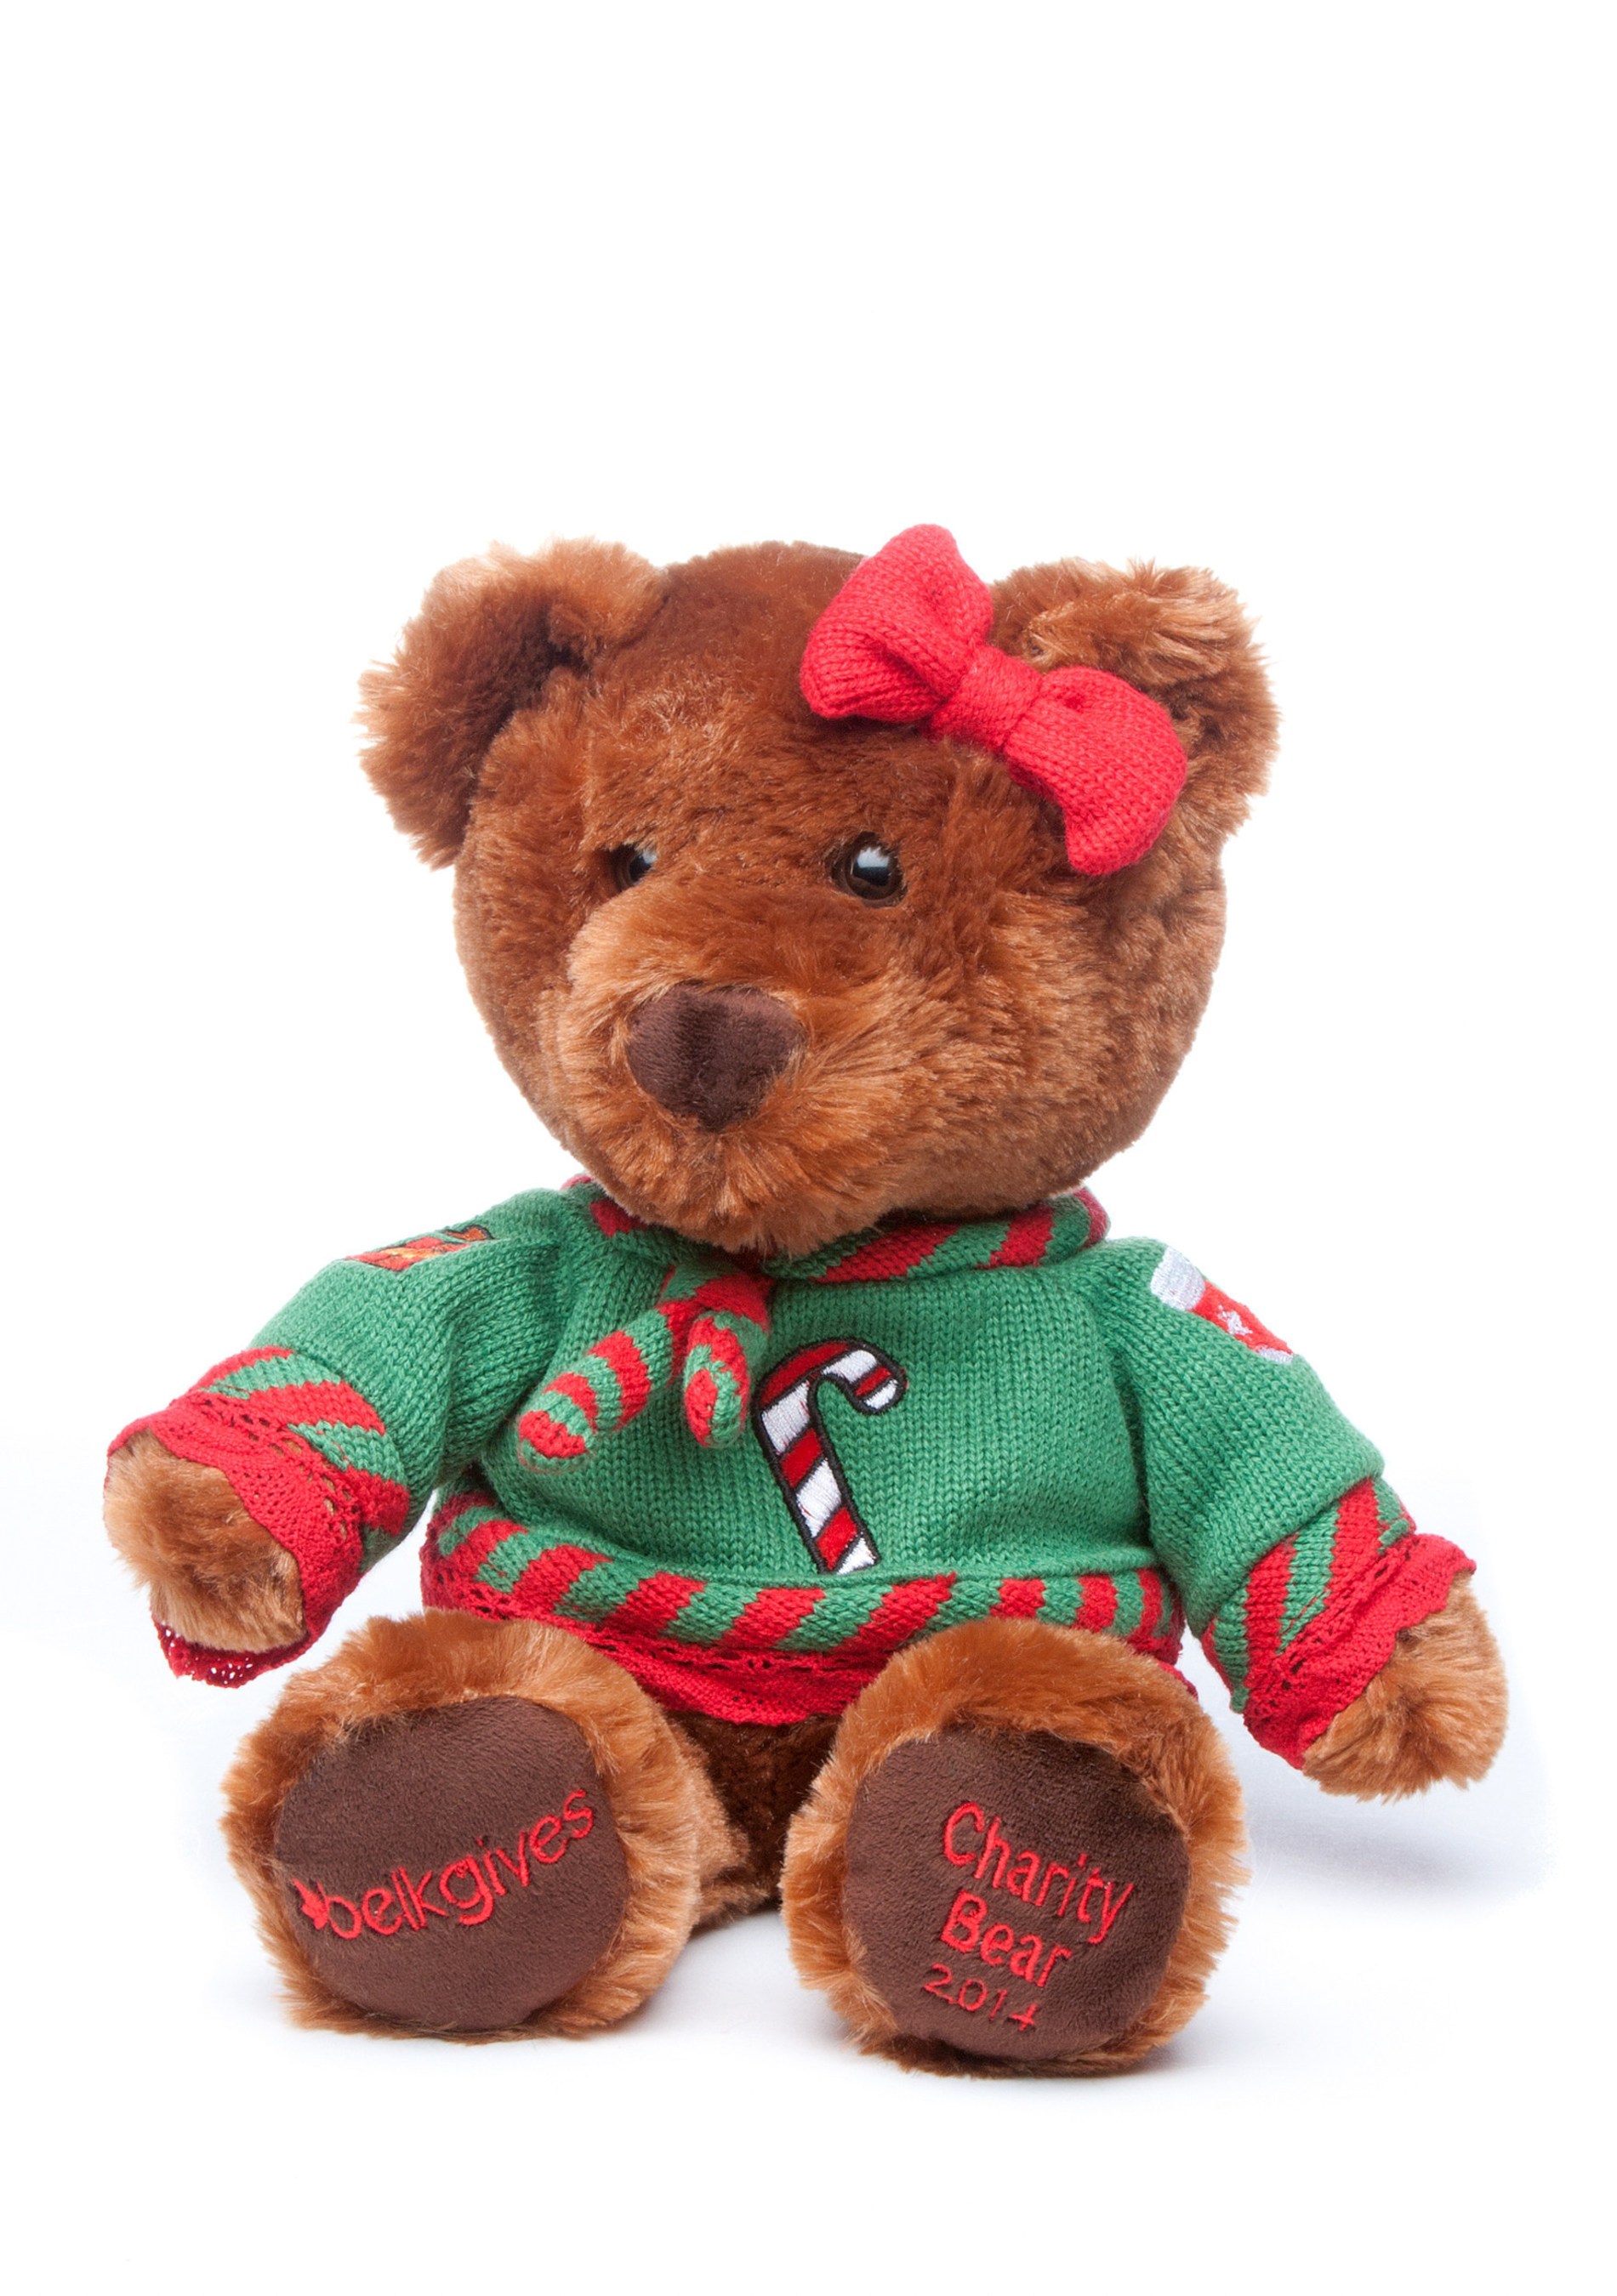 The first-ever Belkie Charity Bear, designed by a nine-year-old from North Carolina, was unveiled today at Belk's SantaFest. Photo provided by Belk.